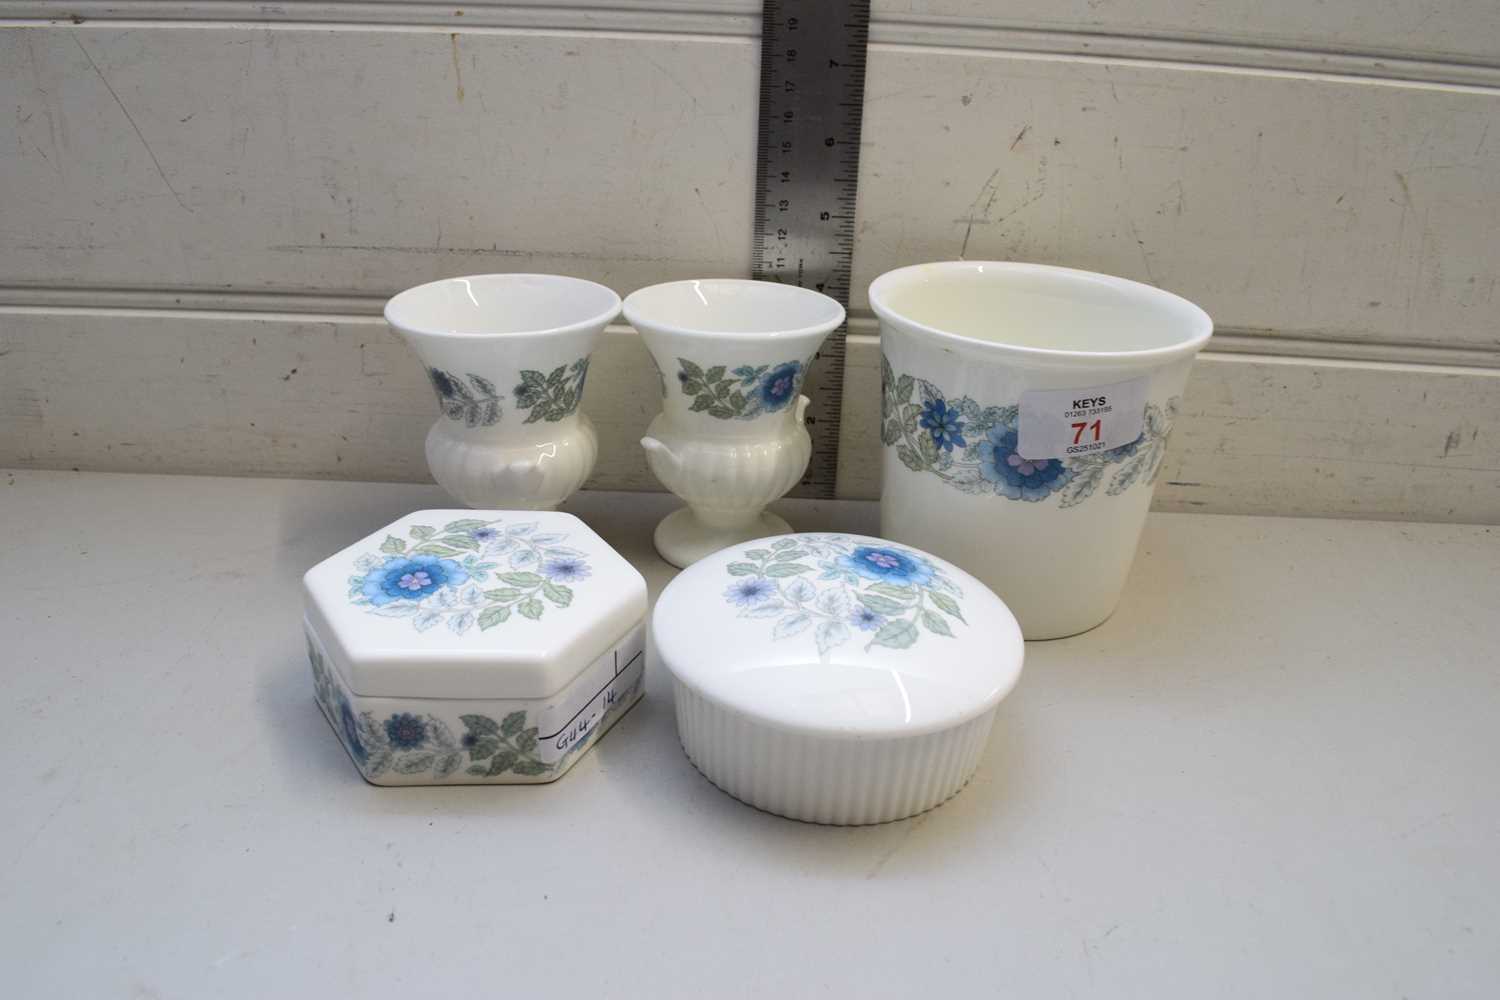 COLLECTION OF WEDGWOOD CLEMENTINE PATTERN CHINA WARES COMPRISING PAIR OF SMALL VASES, TWO TRINKET